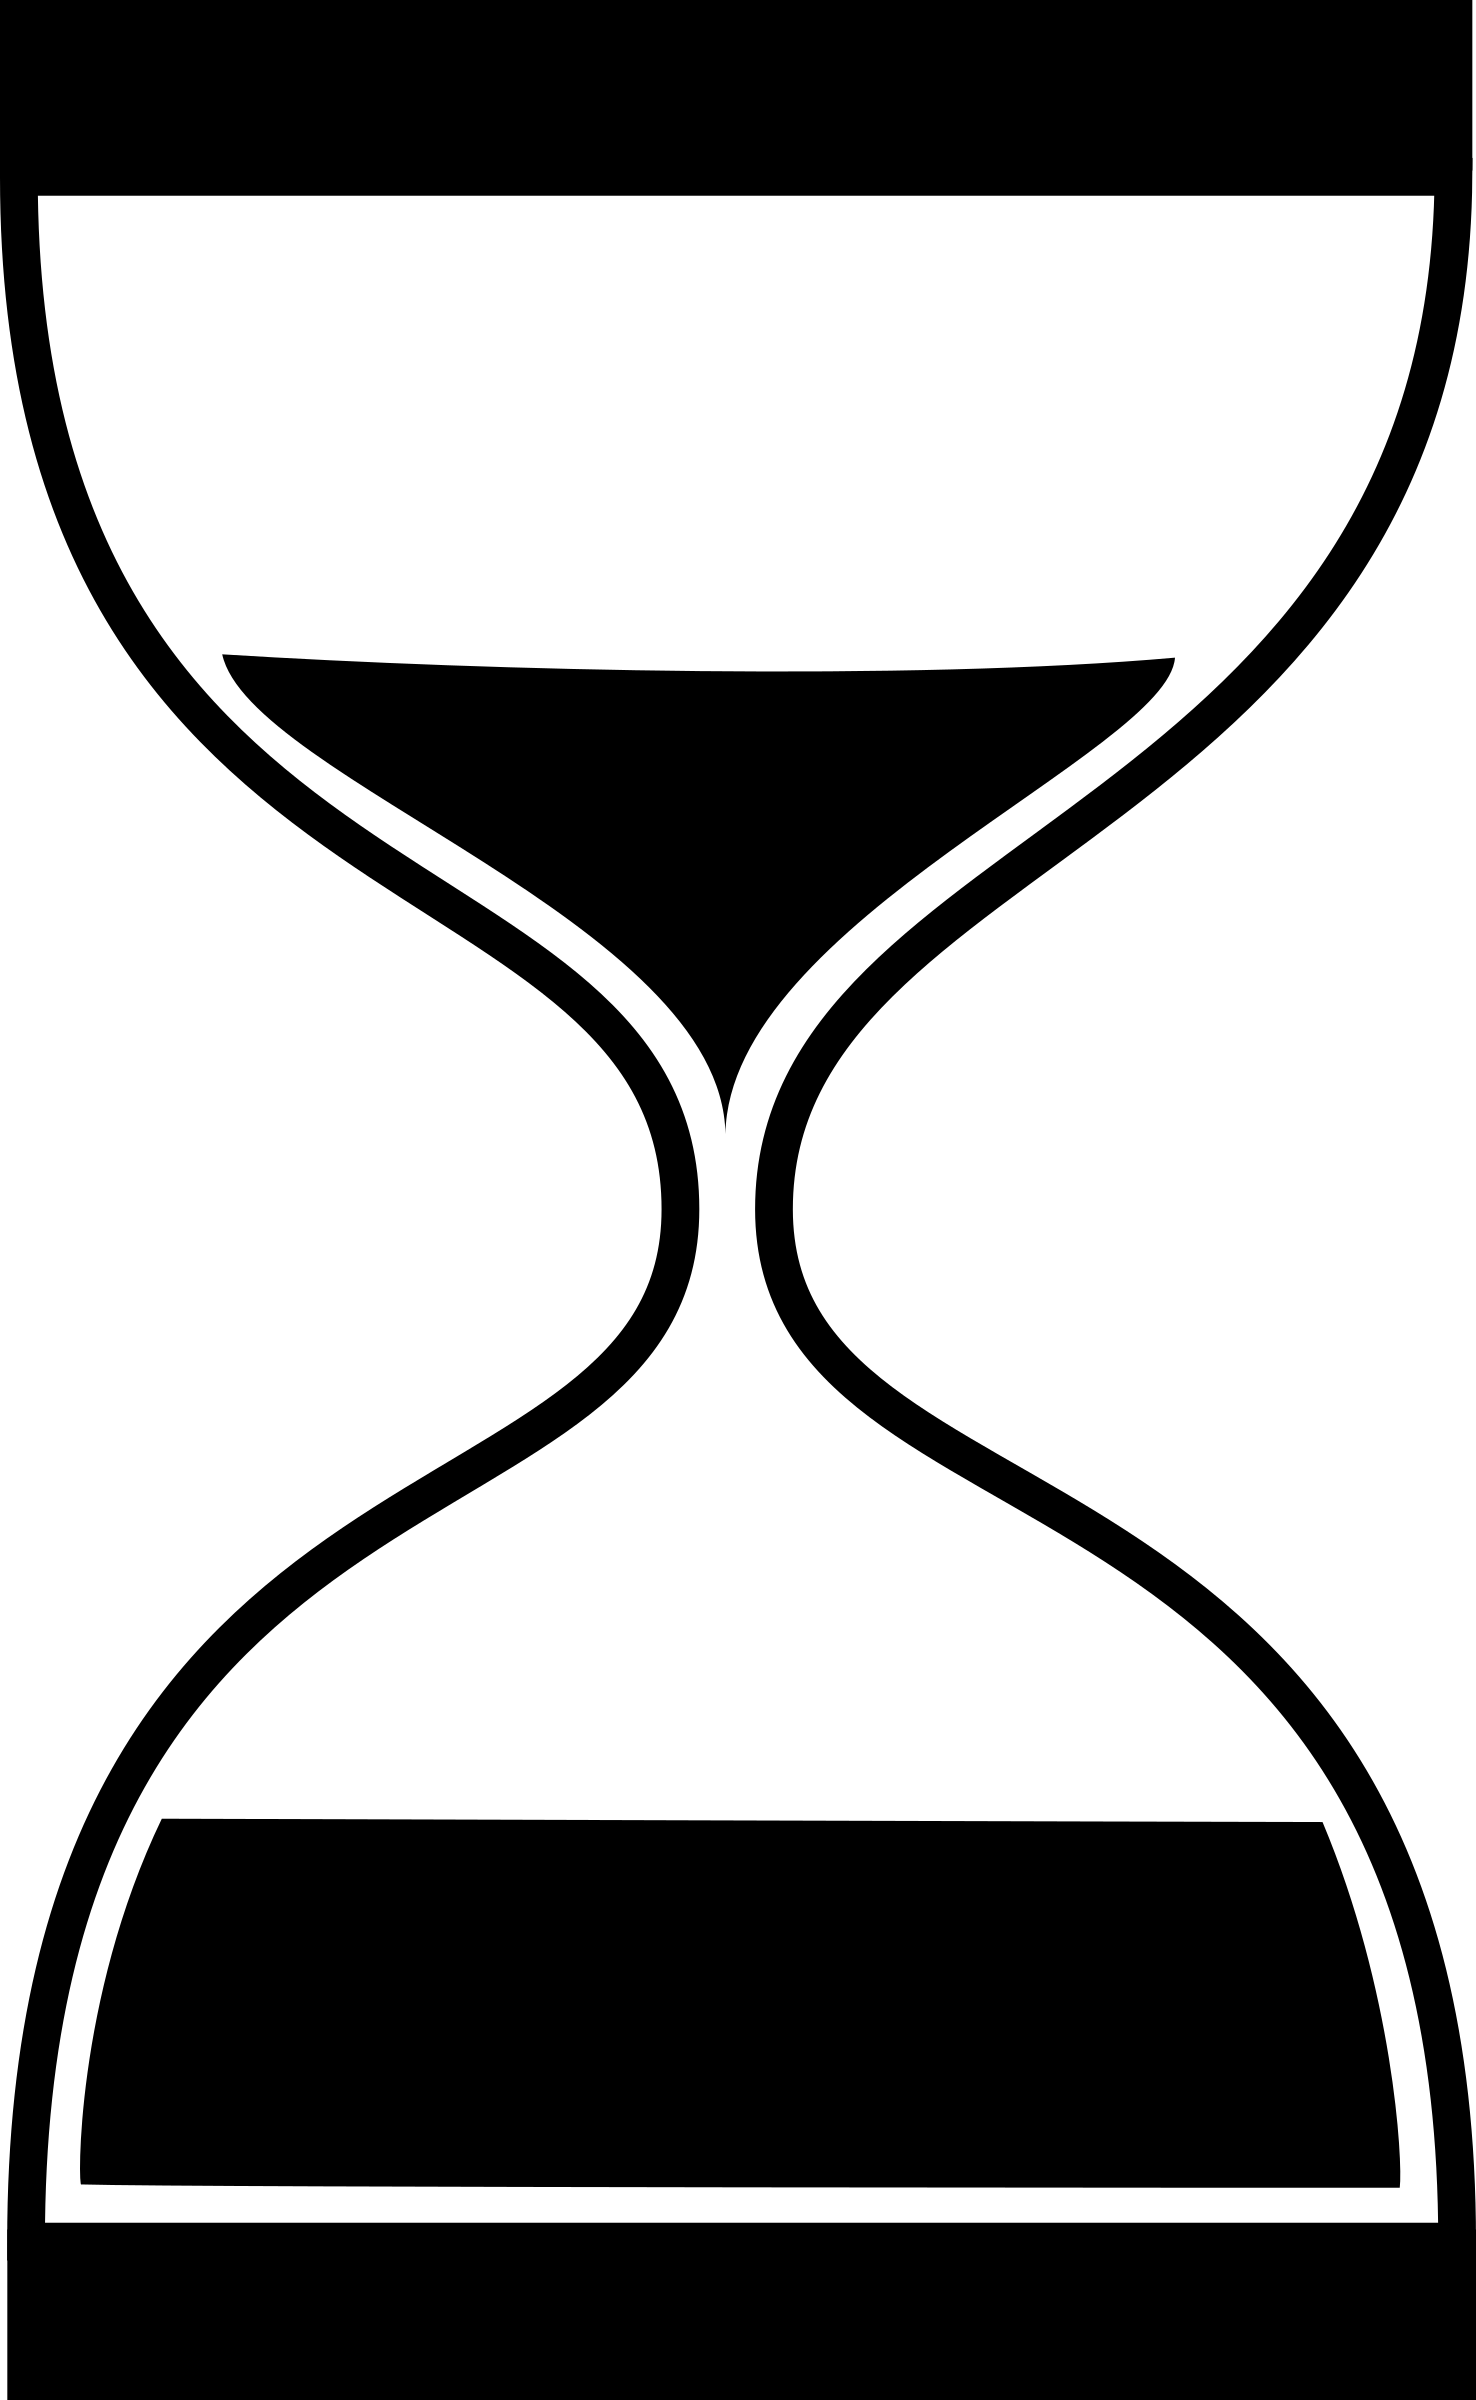 Animated hourglass clipart free to use clip art resource - FamClipart